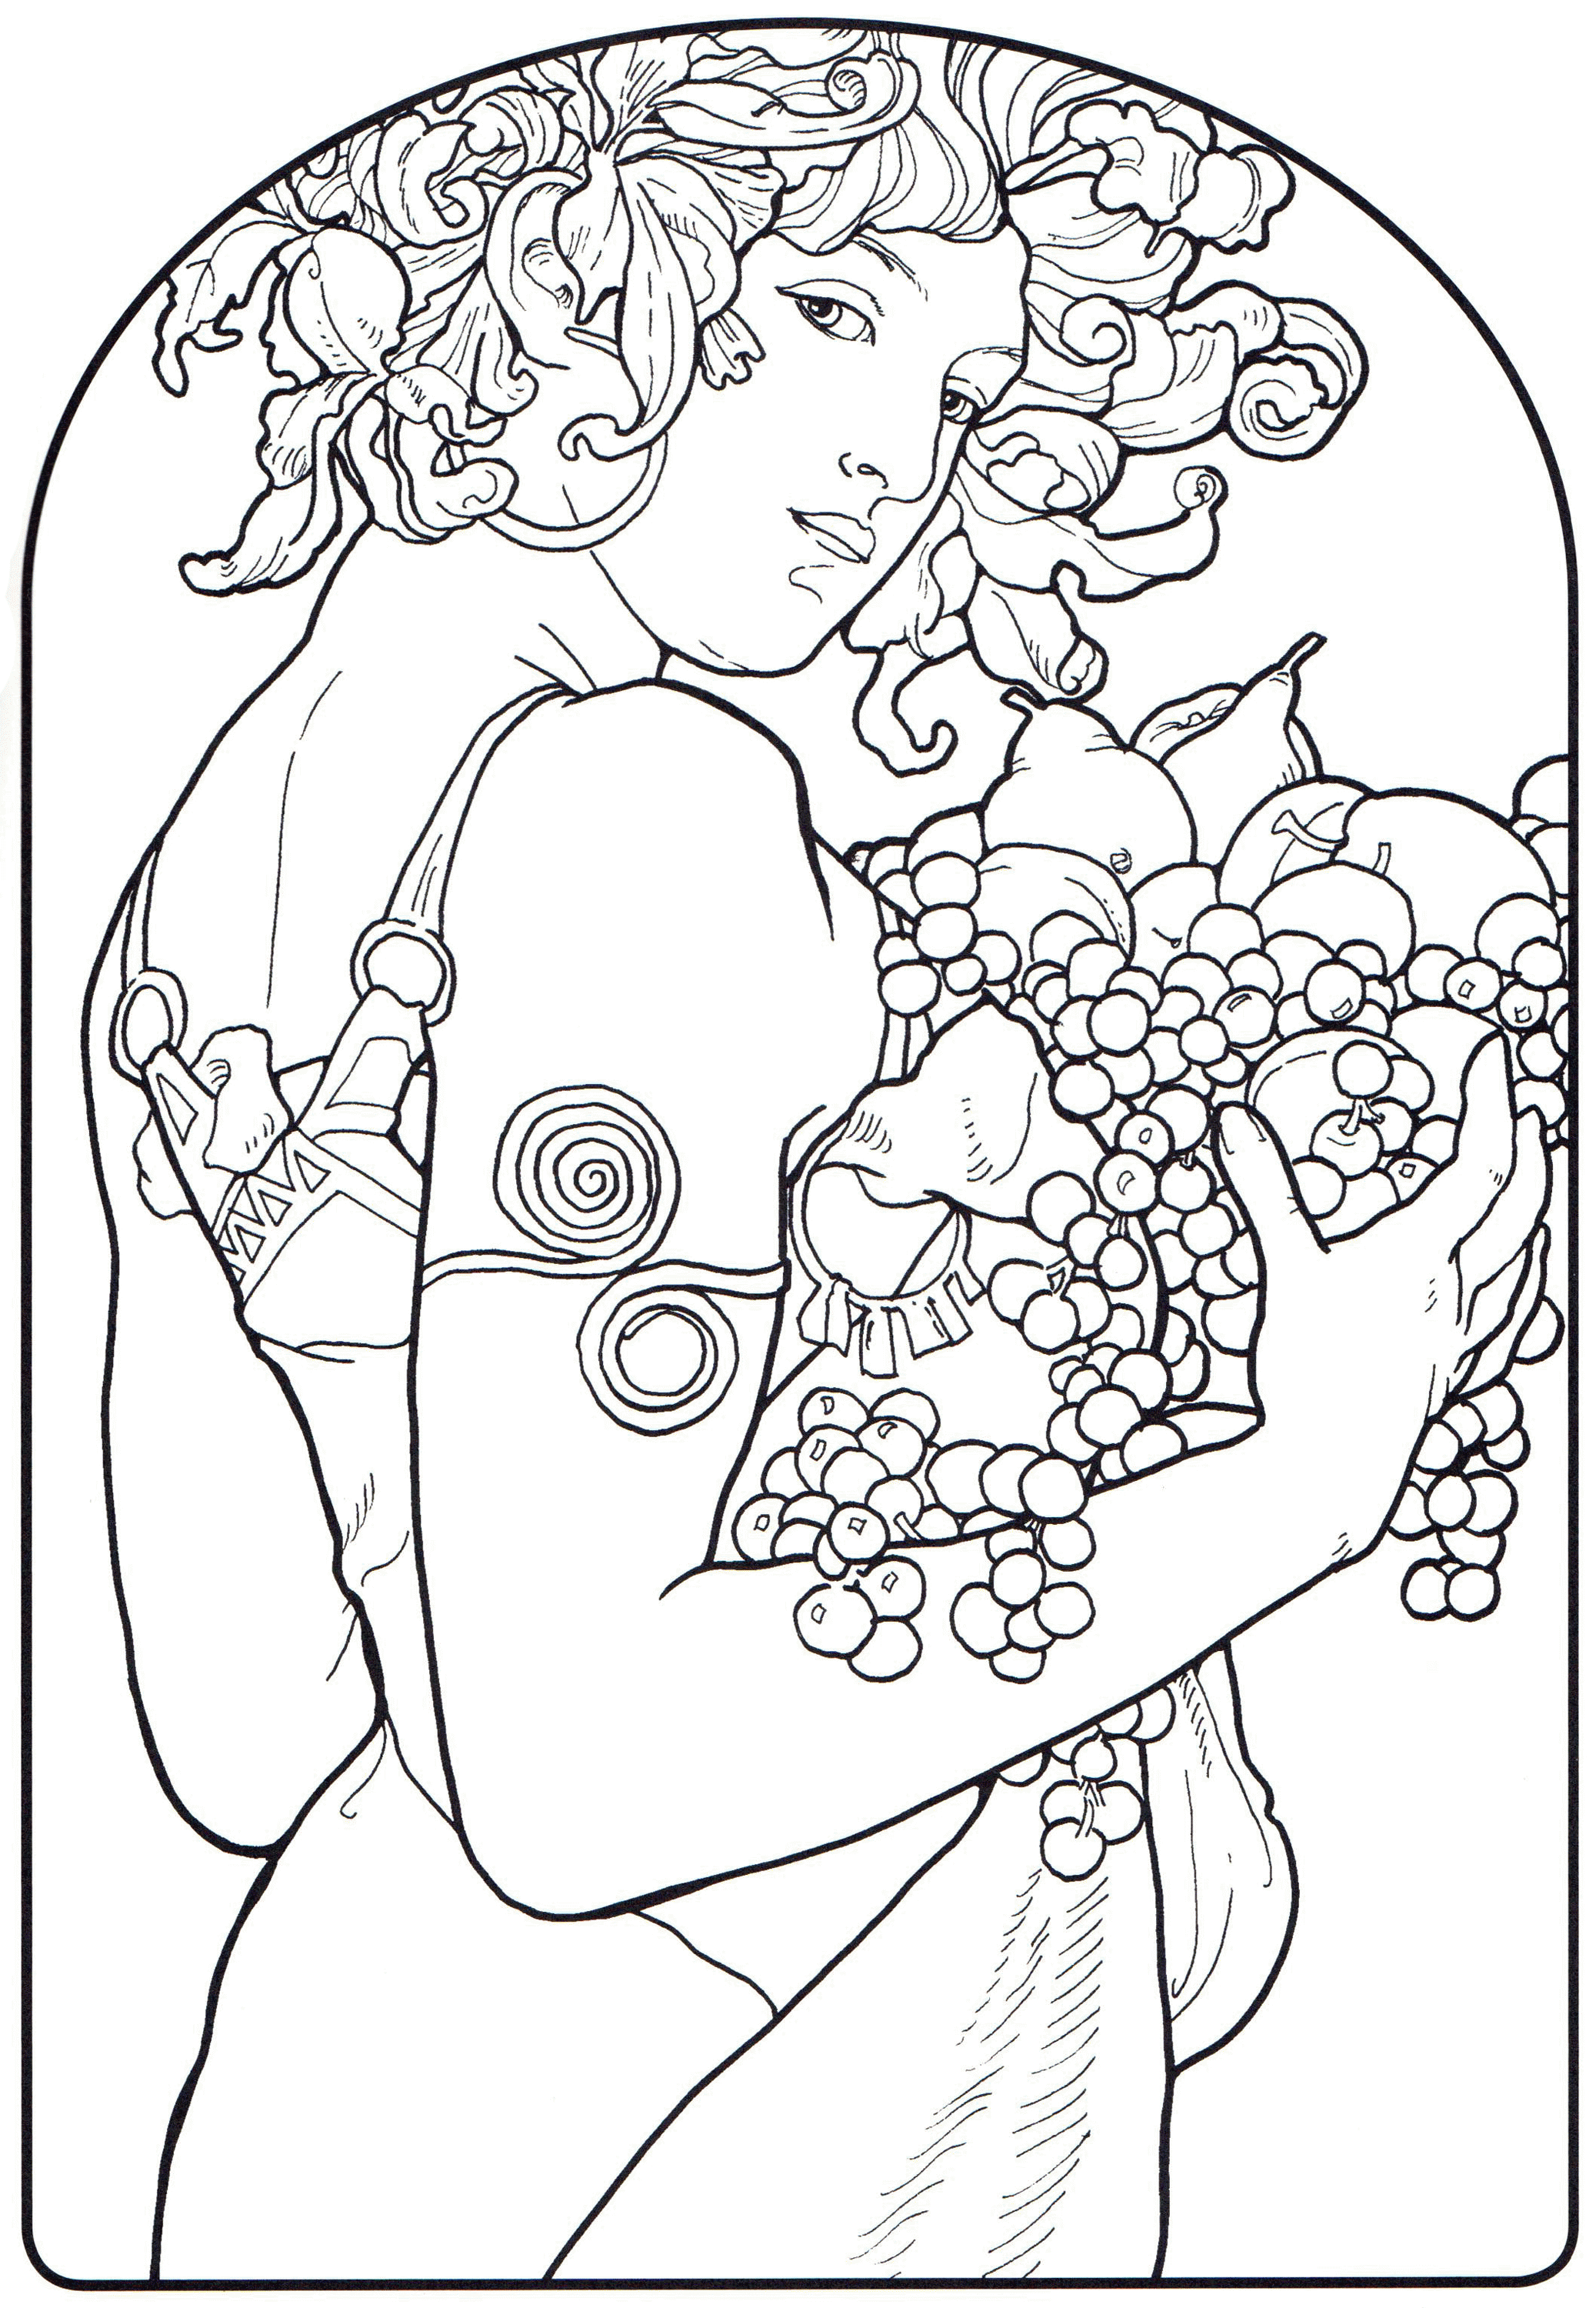 Coloring Pages For Art Students - Coloring